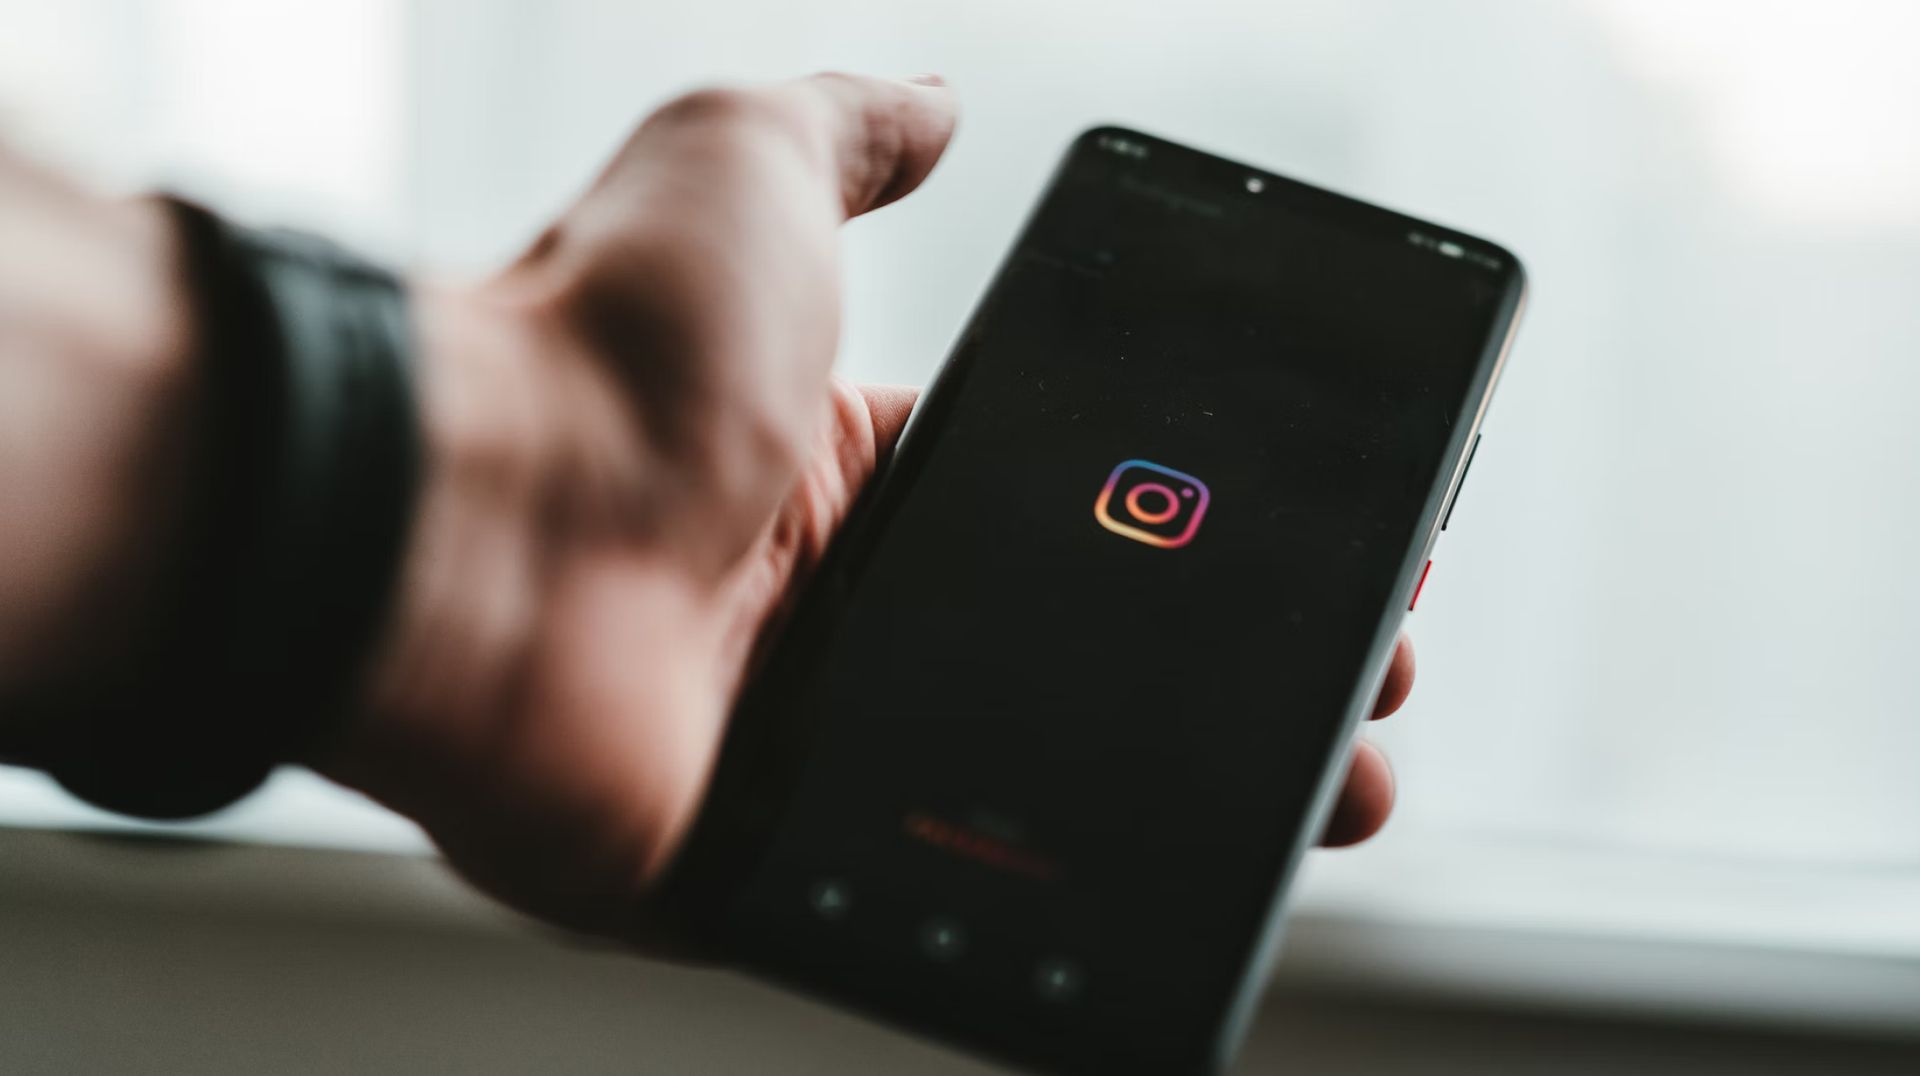 How to unrestrict someone on Instagram?